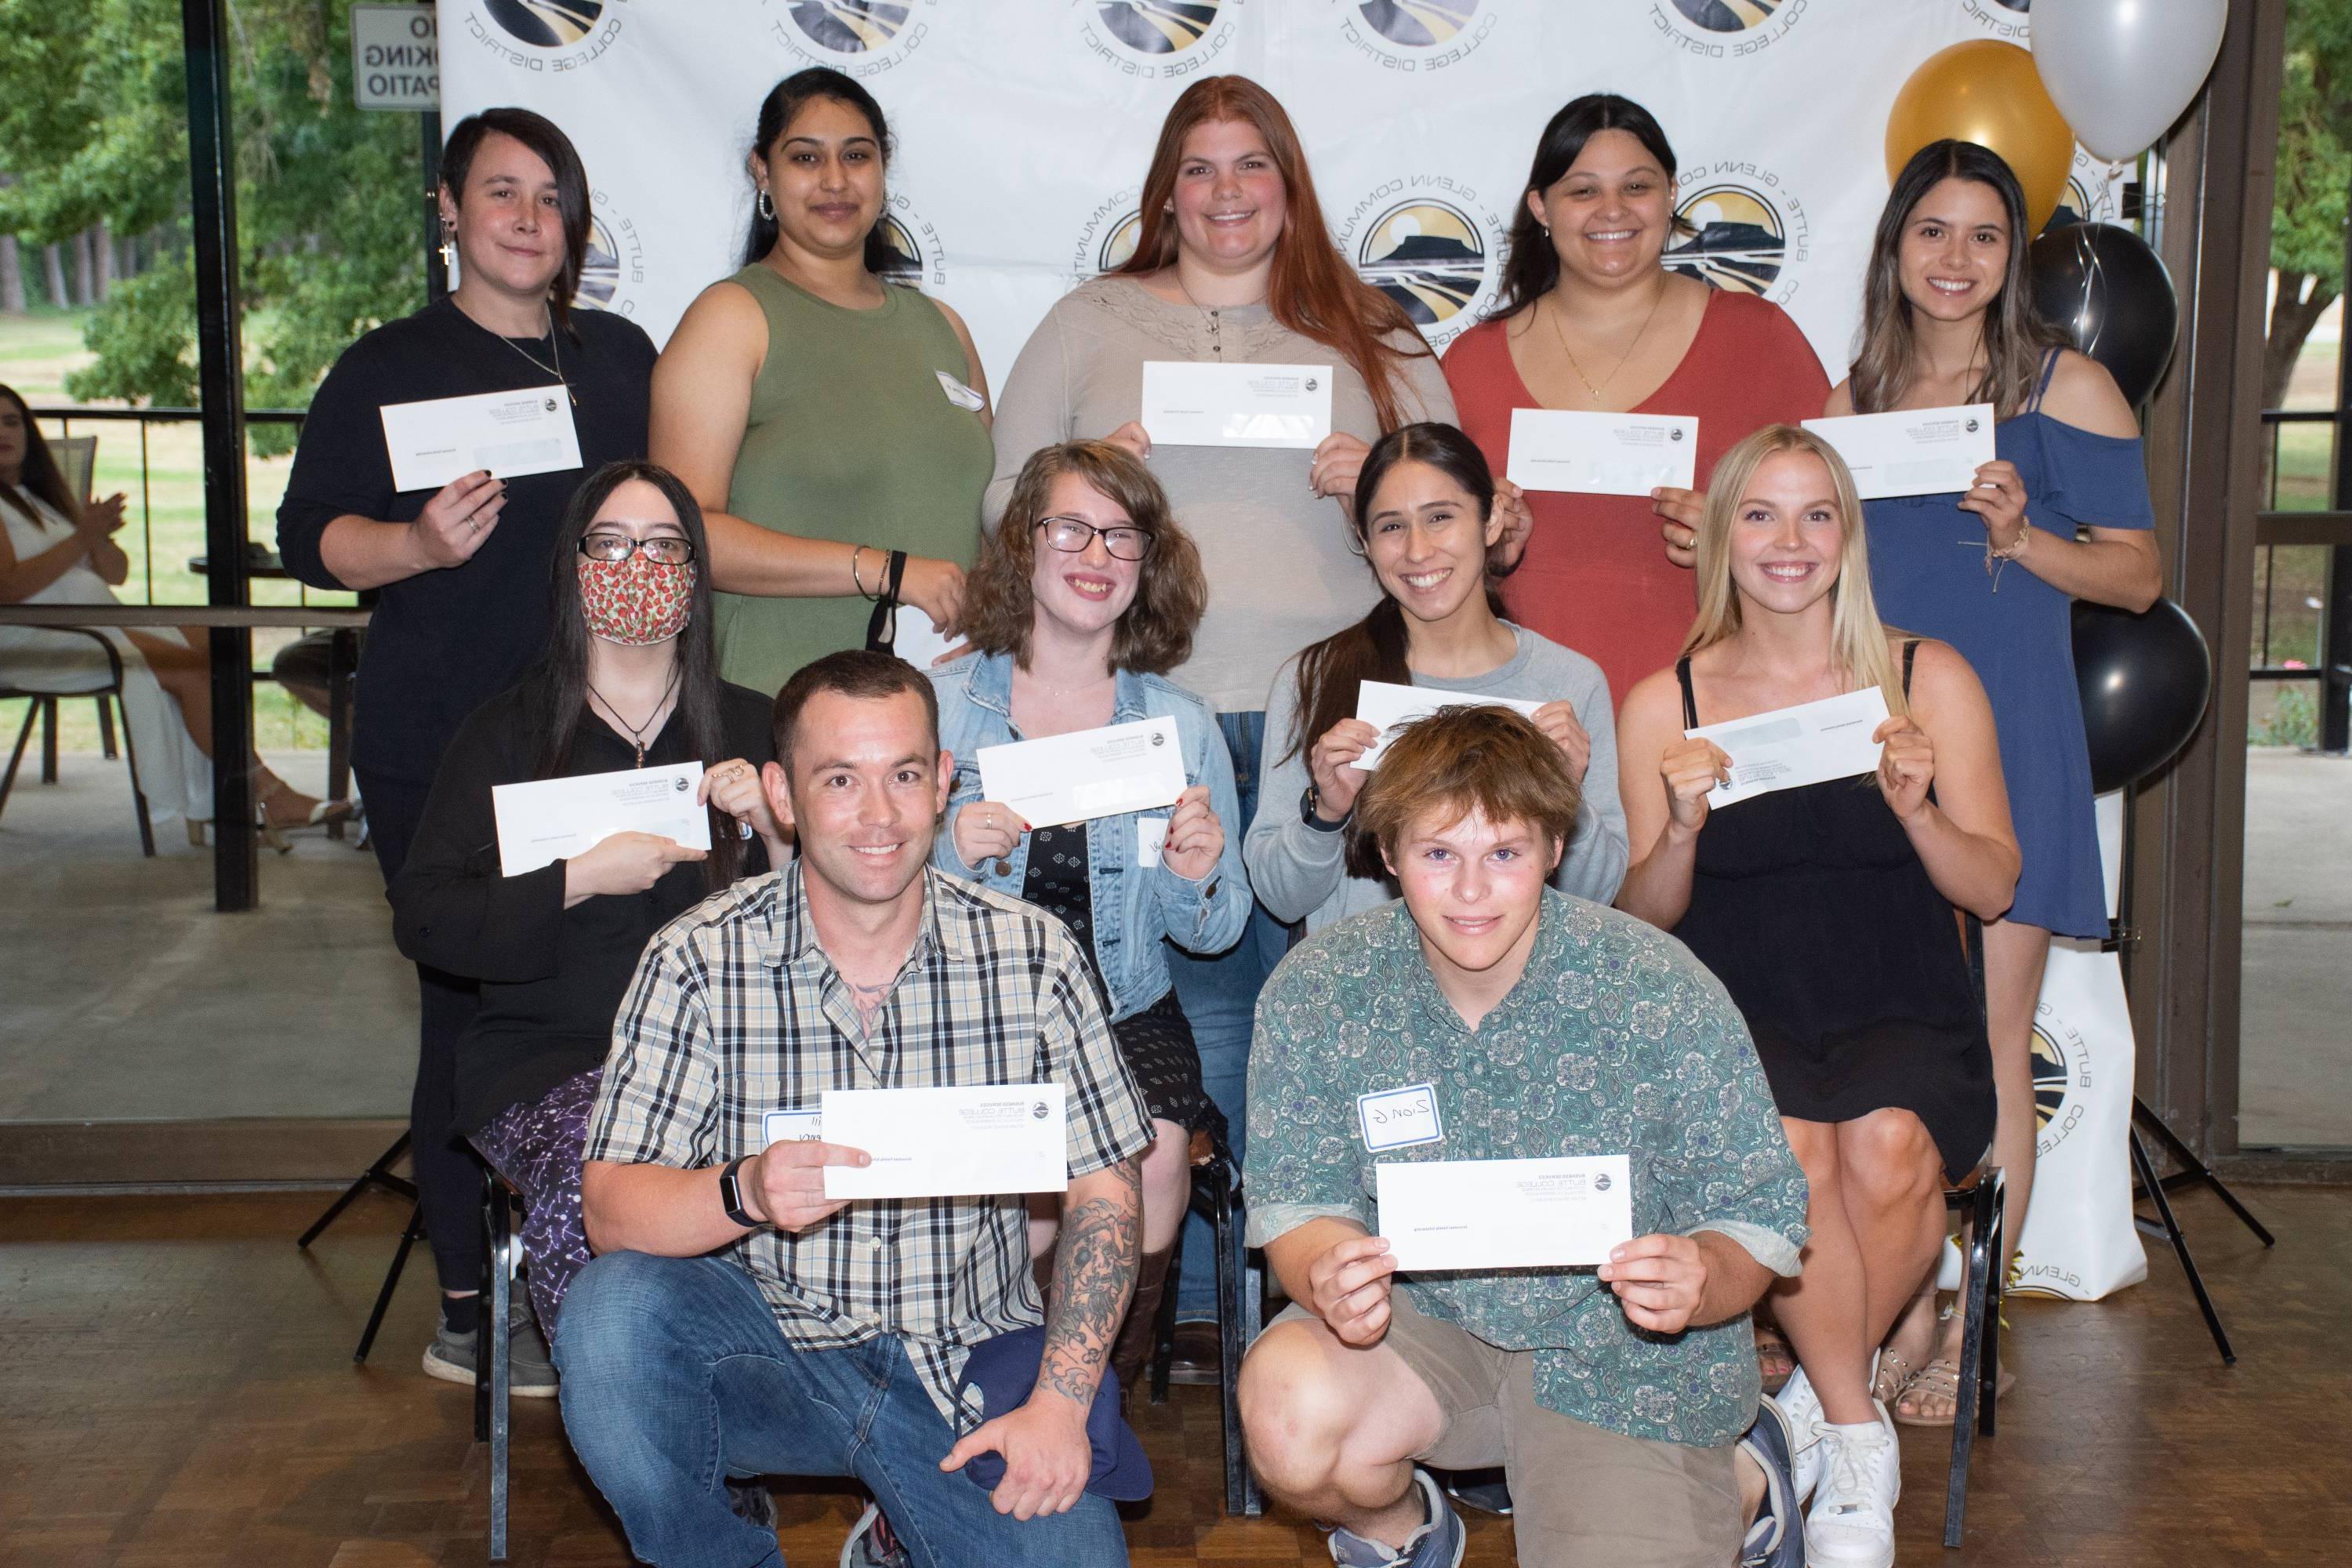 A group of students pose together while holding scholarship checks.